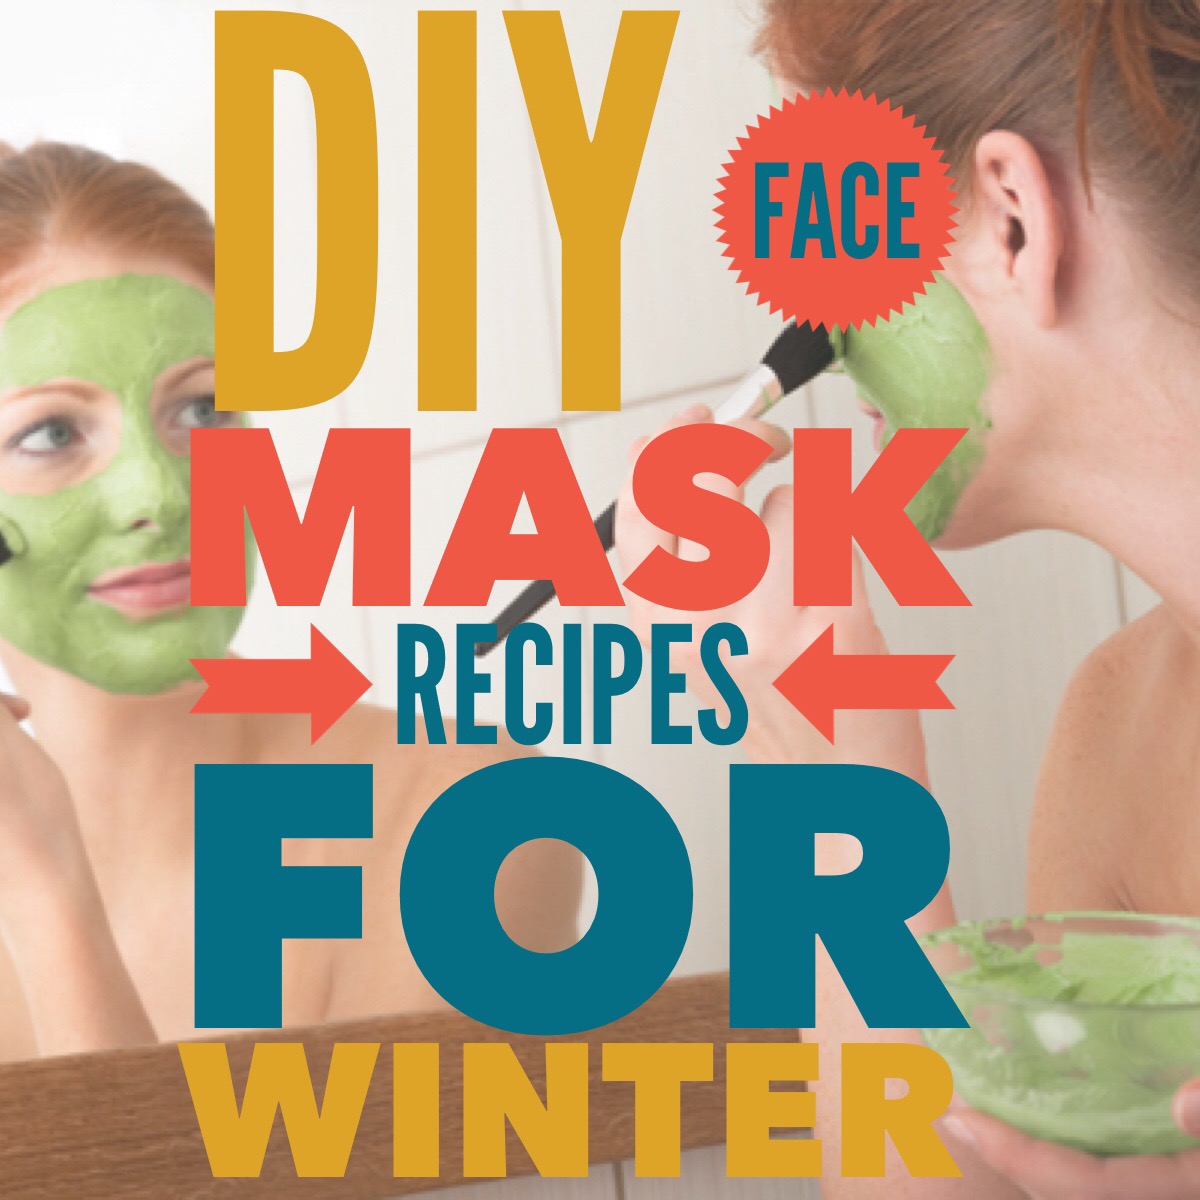 DIY At Home Face Mask Recipes for the Winter #beautybuzz